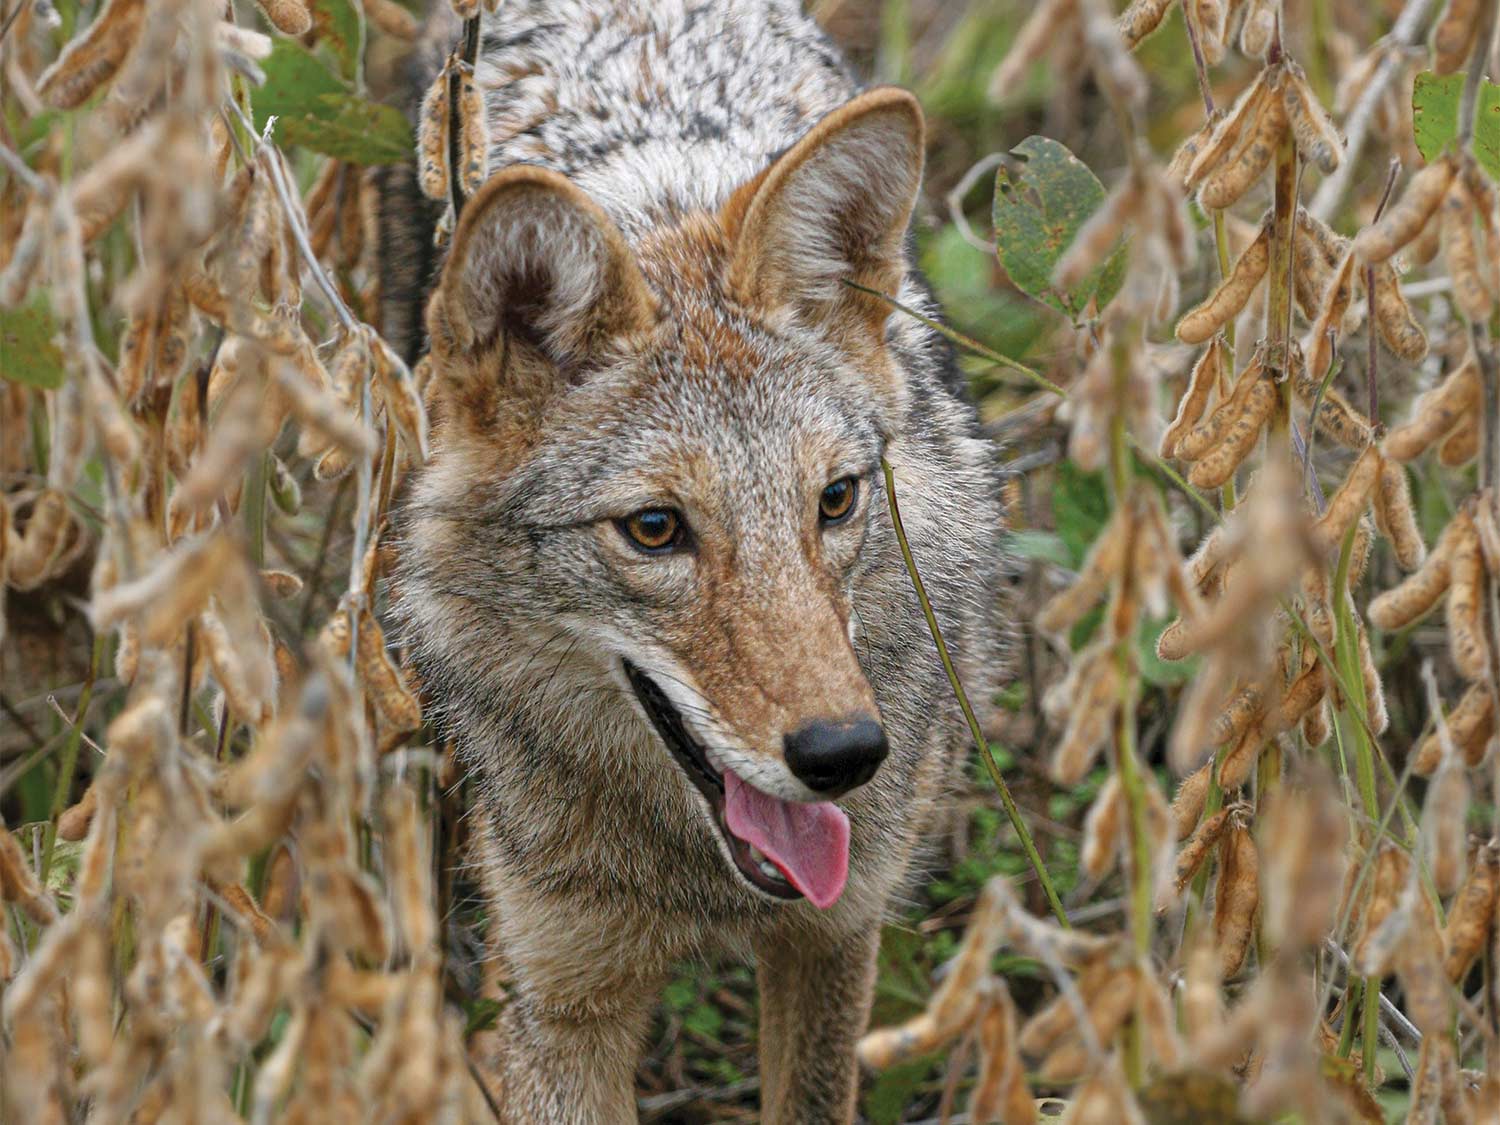 An Ohio coyote slides through standing soybeans.